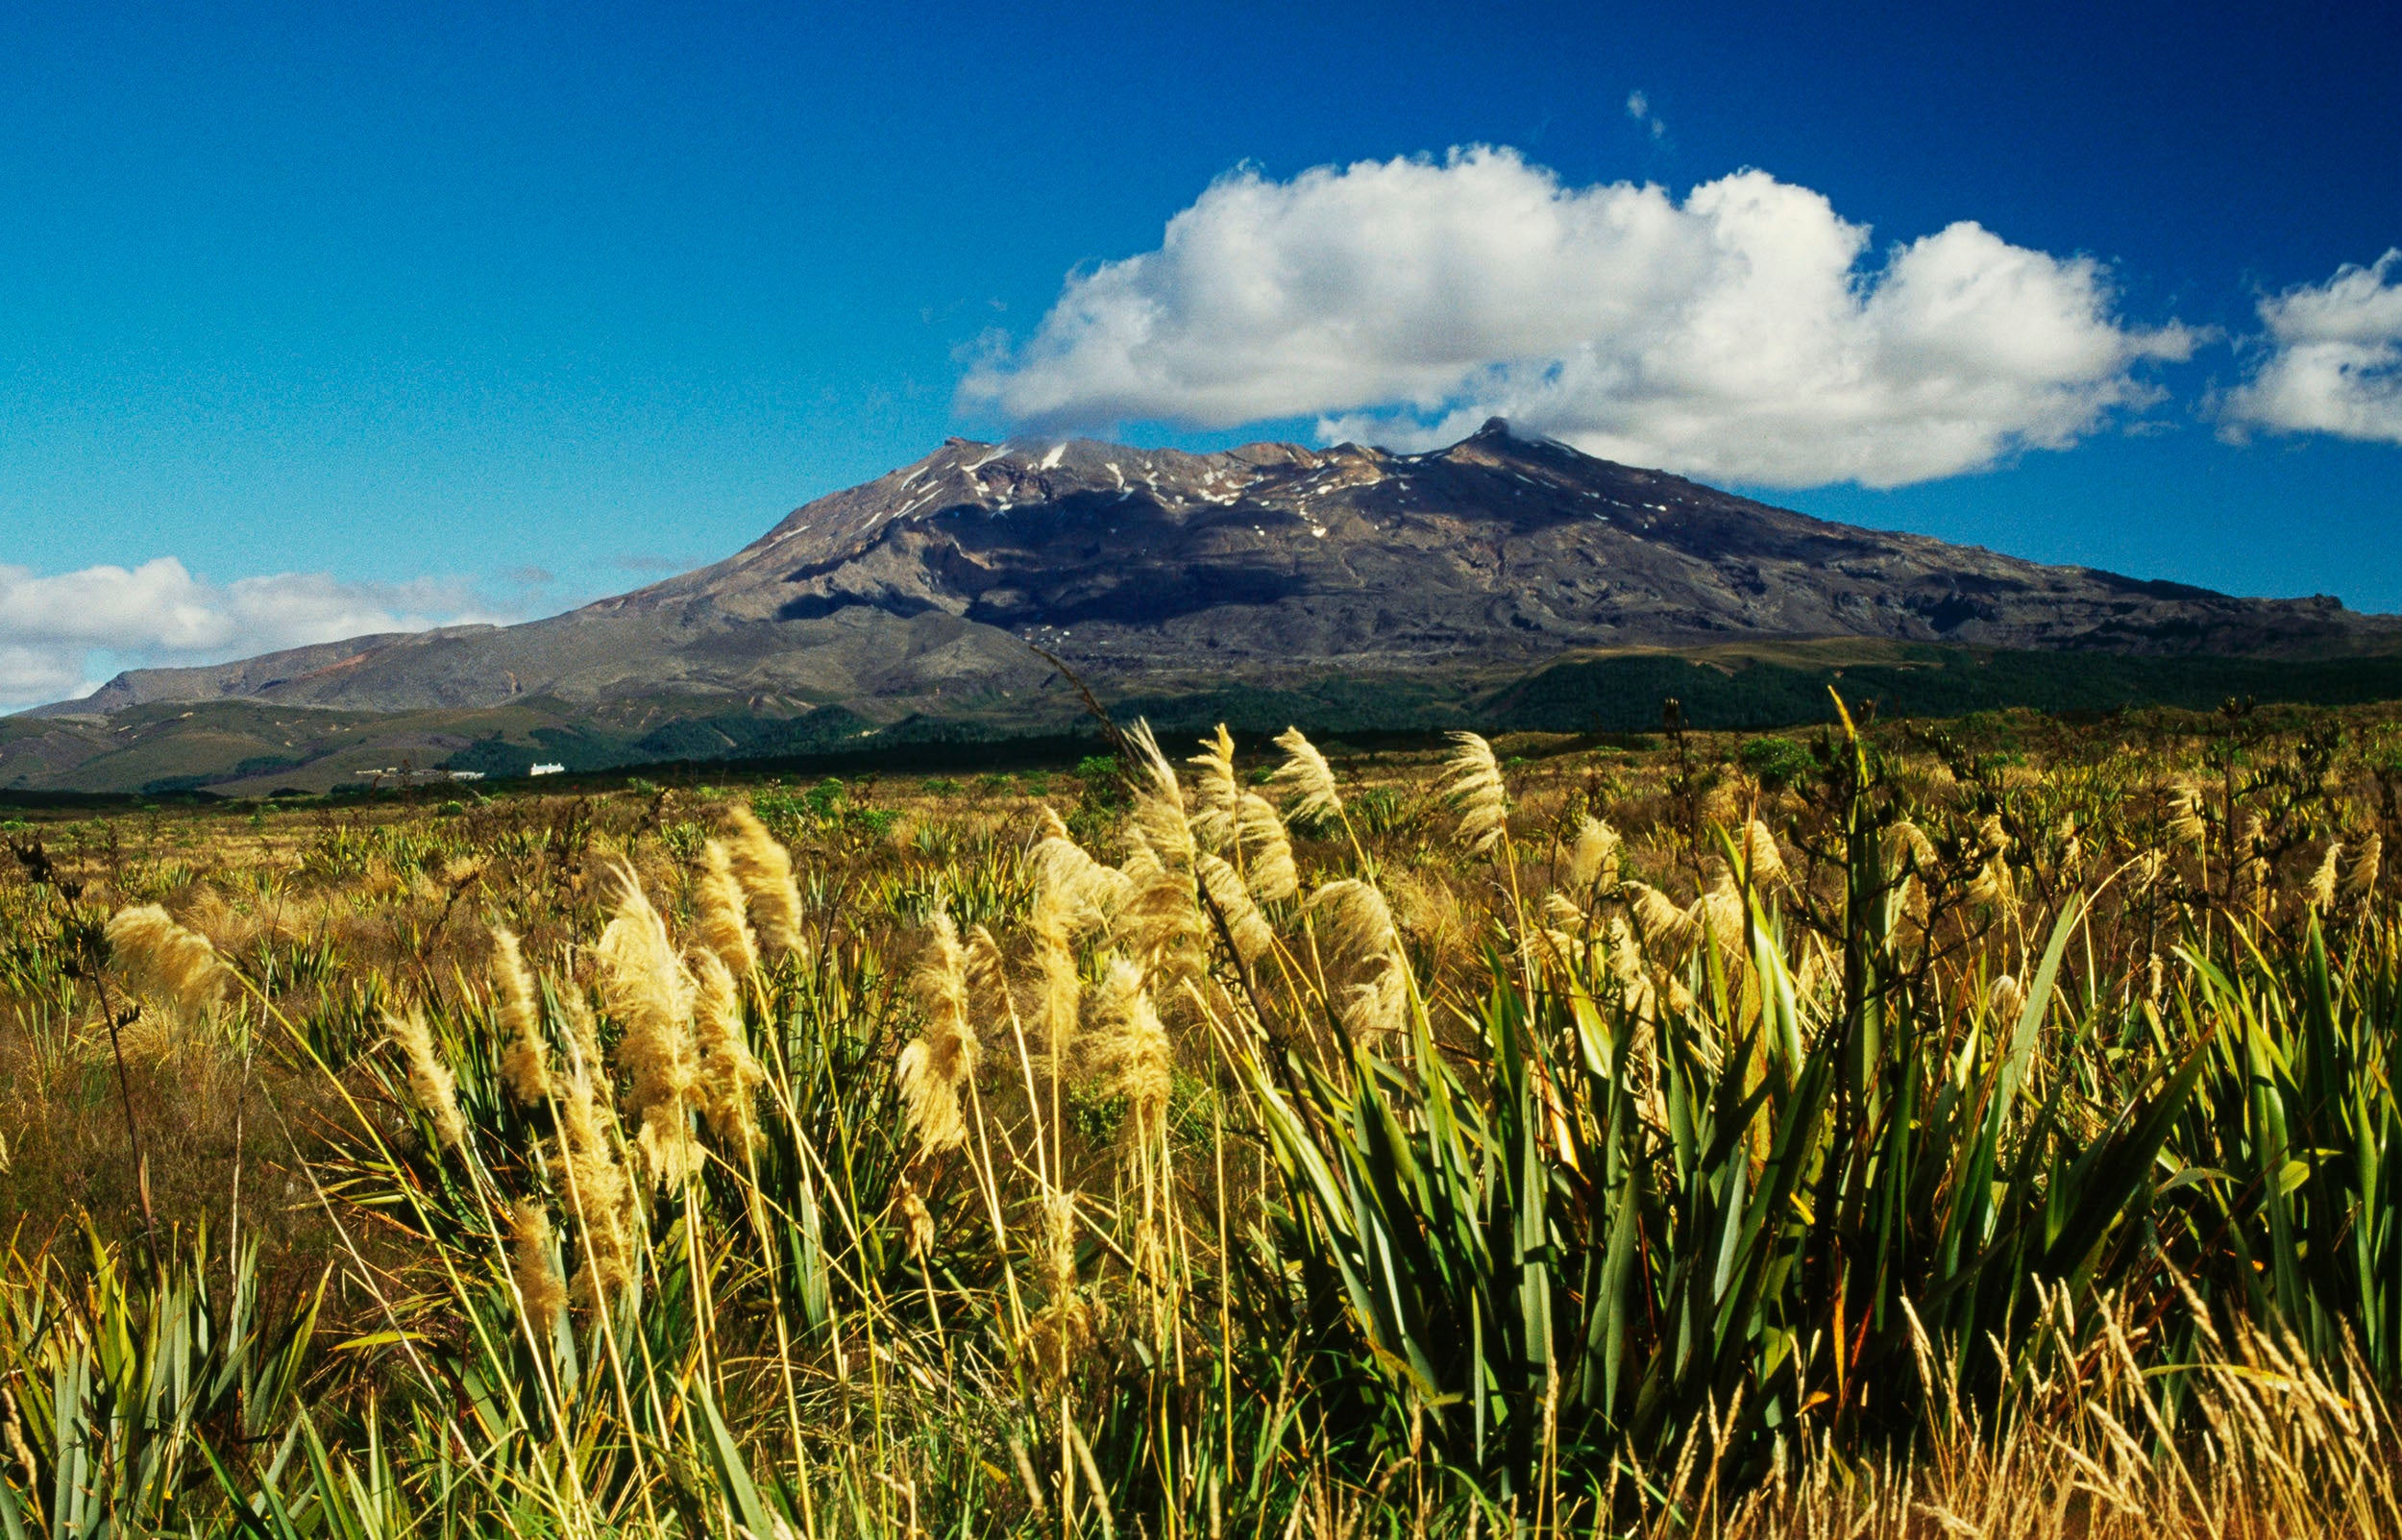 Thousands of hikers travel to Ruapehu every year to soak in the surroundings